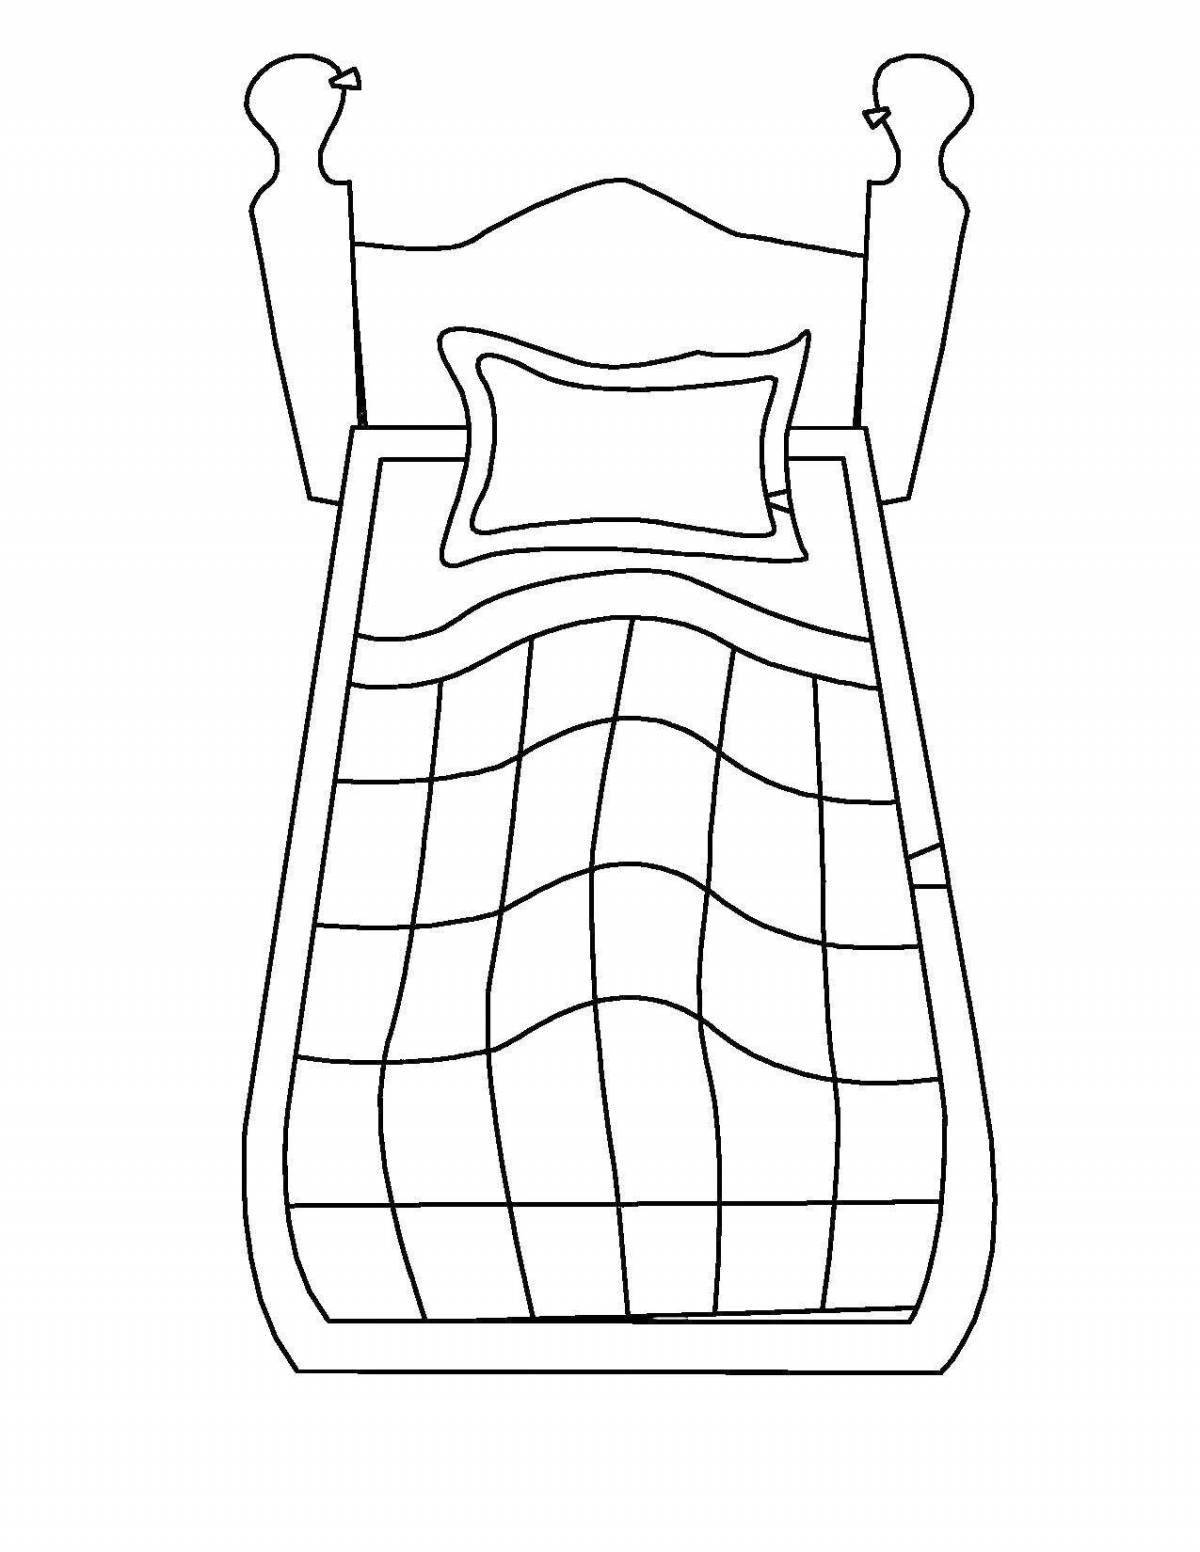 Coloring book warm blanket